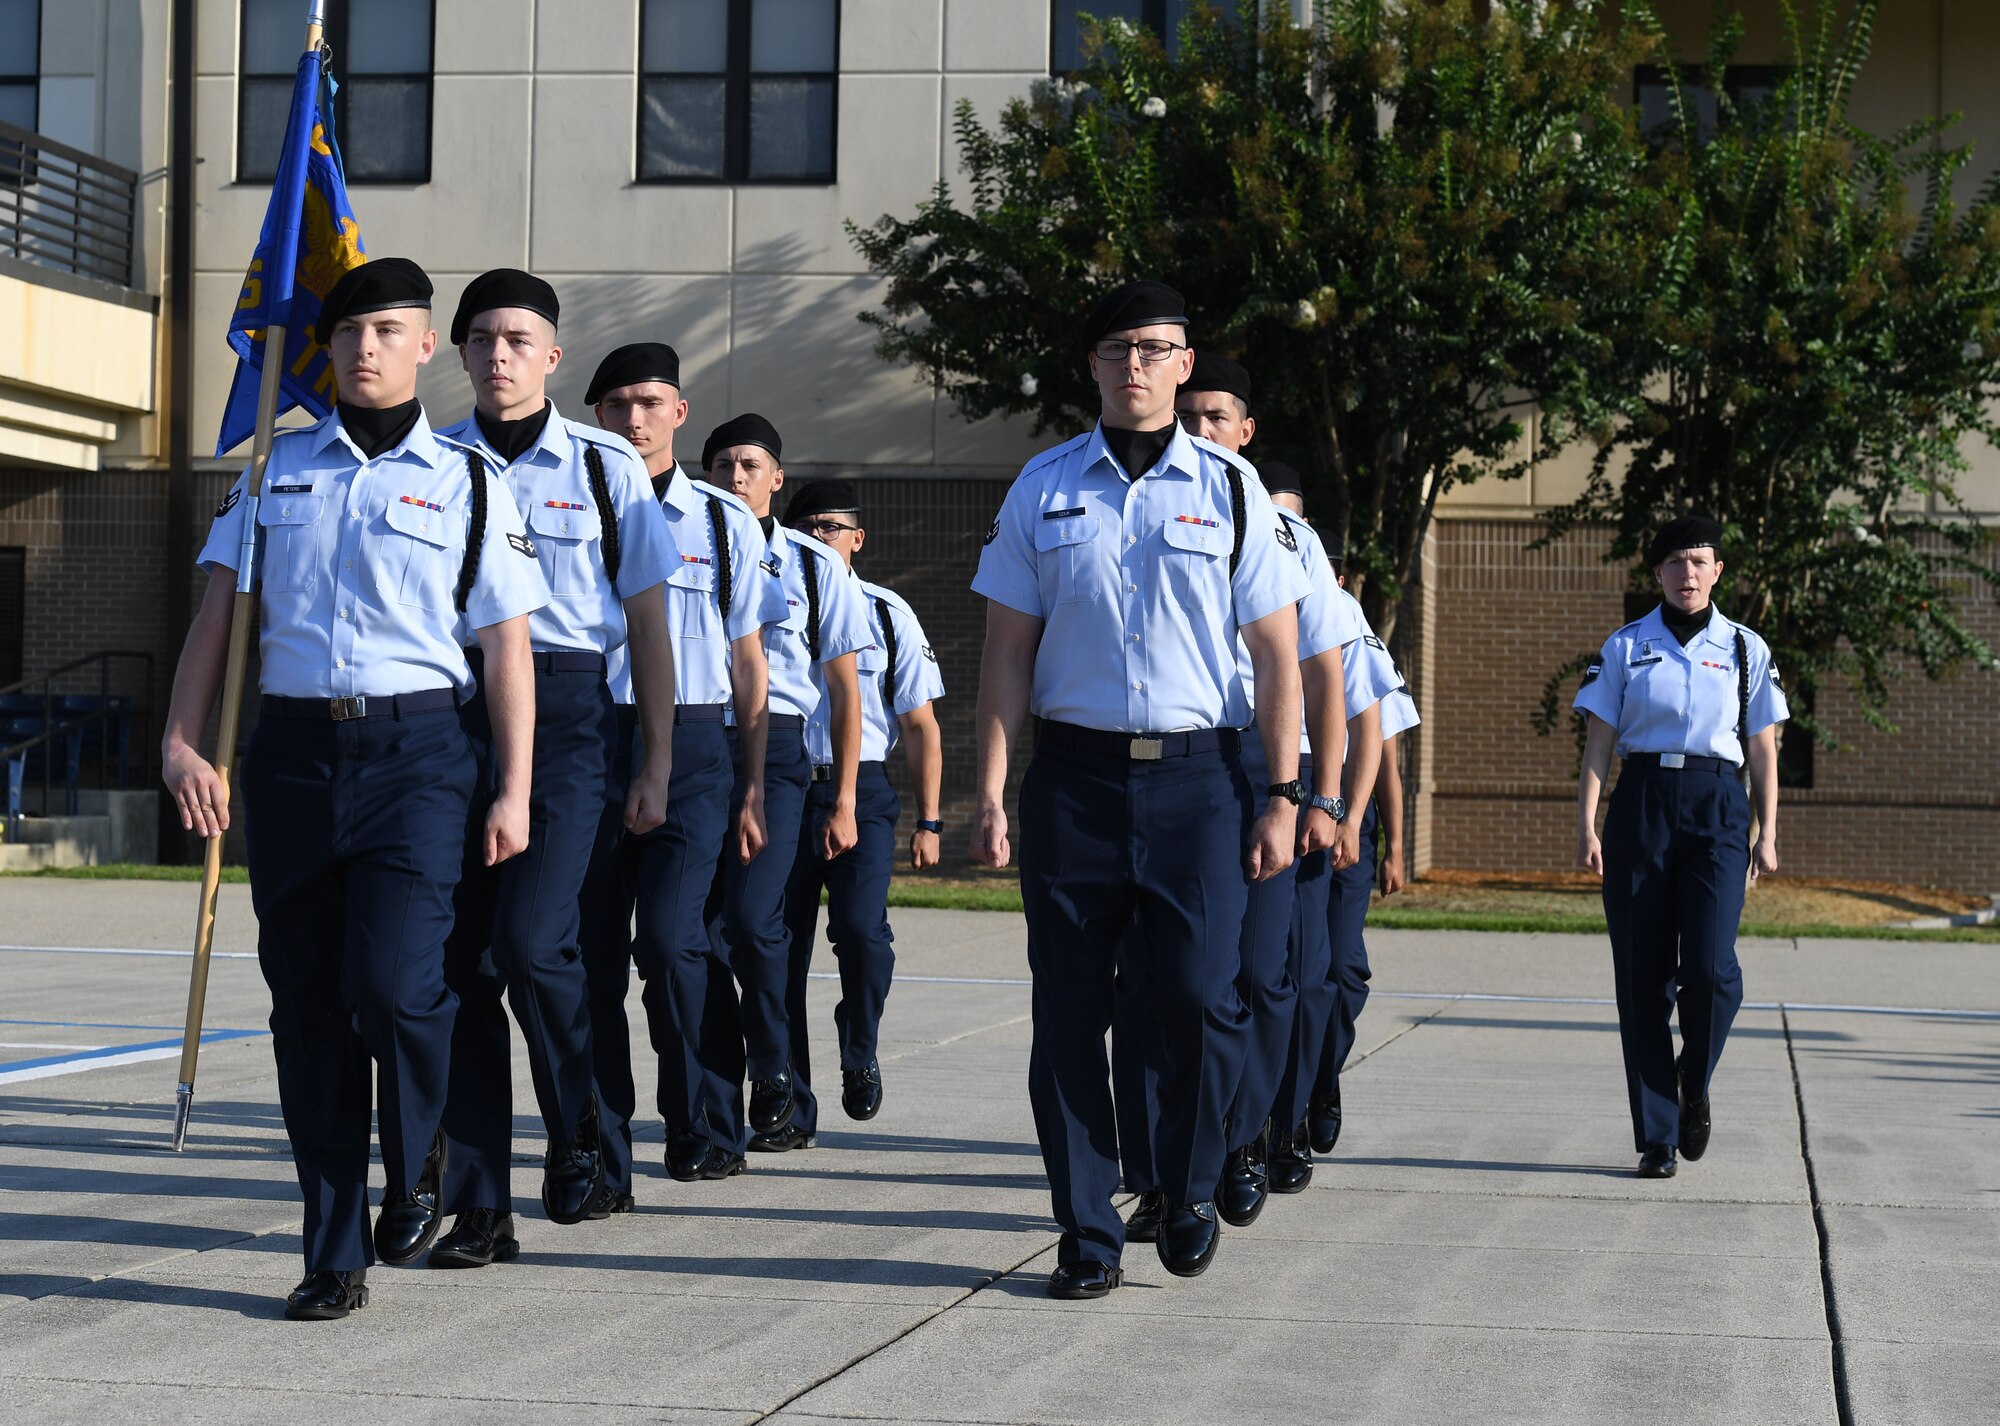 Members of the 338th Training Squadron regulation drill team perform during the 81st Training Group drill down on the Levitow Training Support Facility drill pad at Keesler Air Force Base, Mississippi, Sept. 16, 2022. Keesler trains more than 30,000 students each year. While in training, Airmen are given the opportunity to volunteer to learn and execute drill down routines. (U.S. Air Force photo by Kemberly Groue)